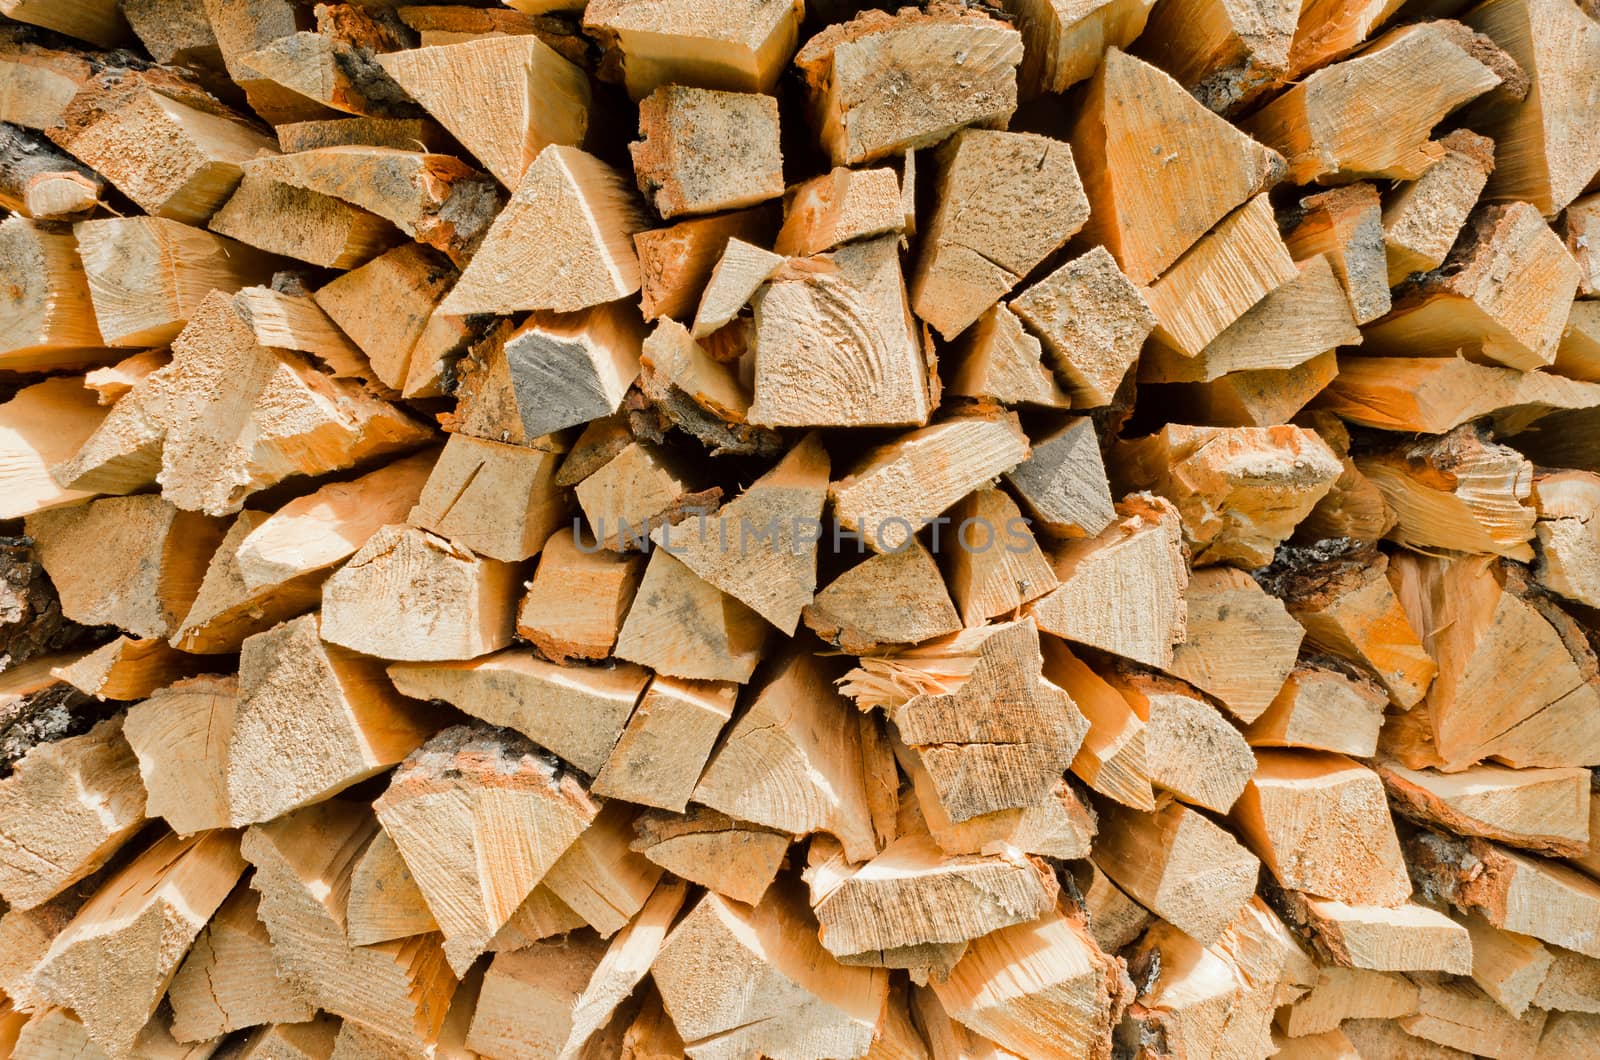 A store of firewood for using in winter time